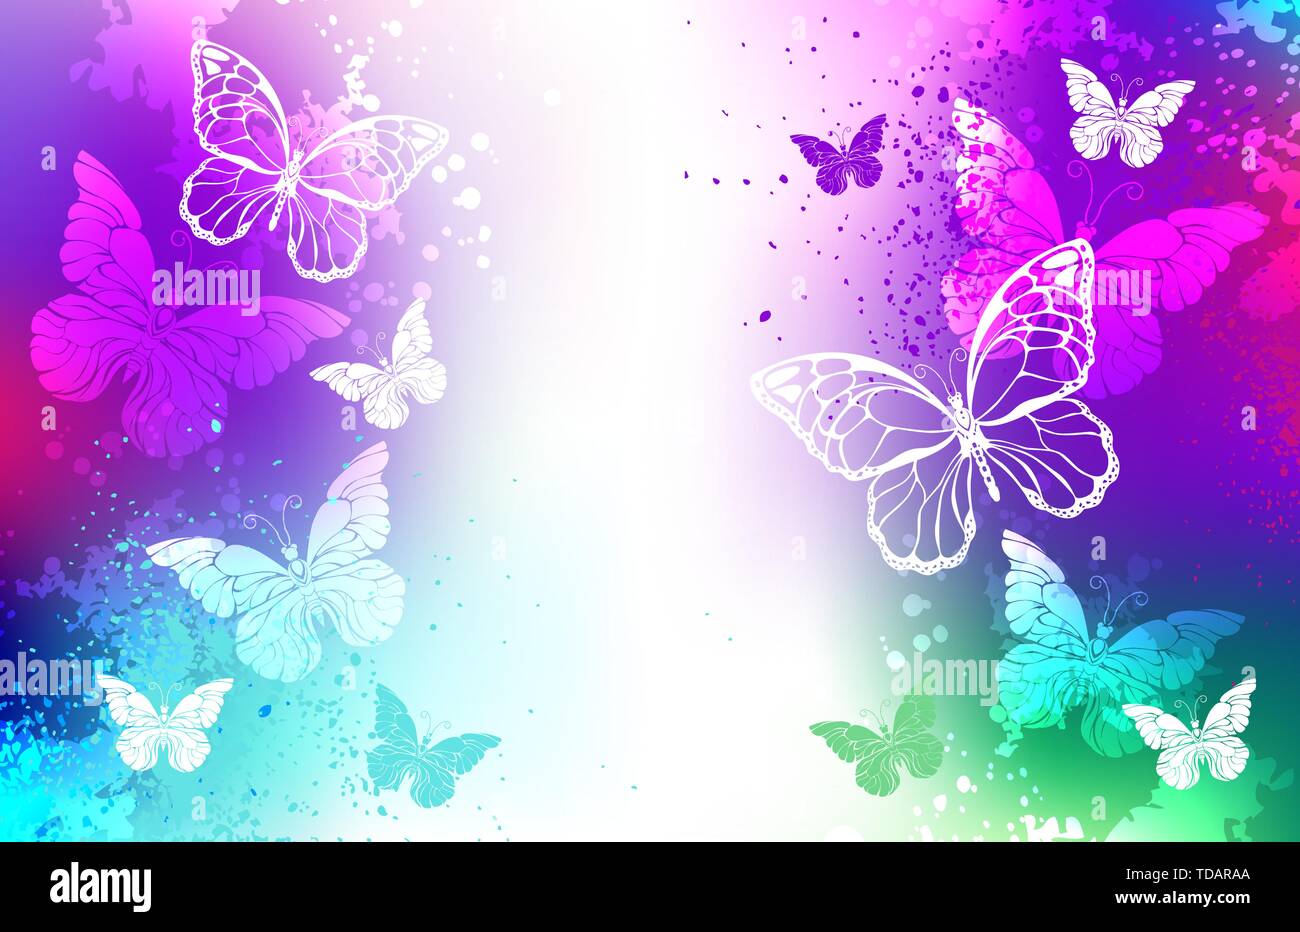 Bright, carelessly painted over purple and turquoise paint background with flying white butterflies. Stock Vector